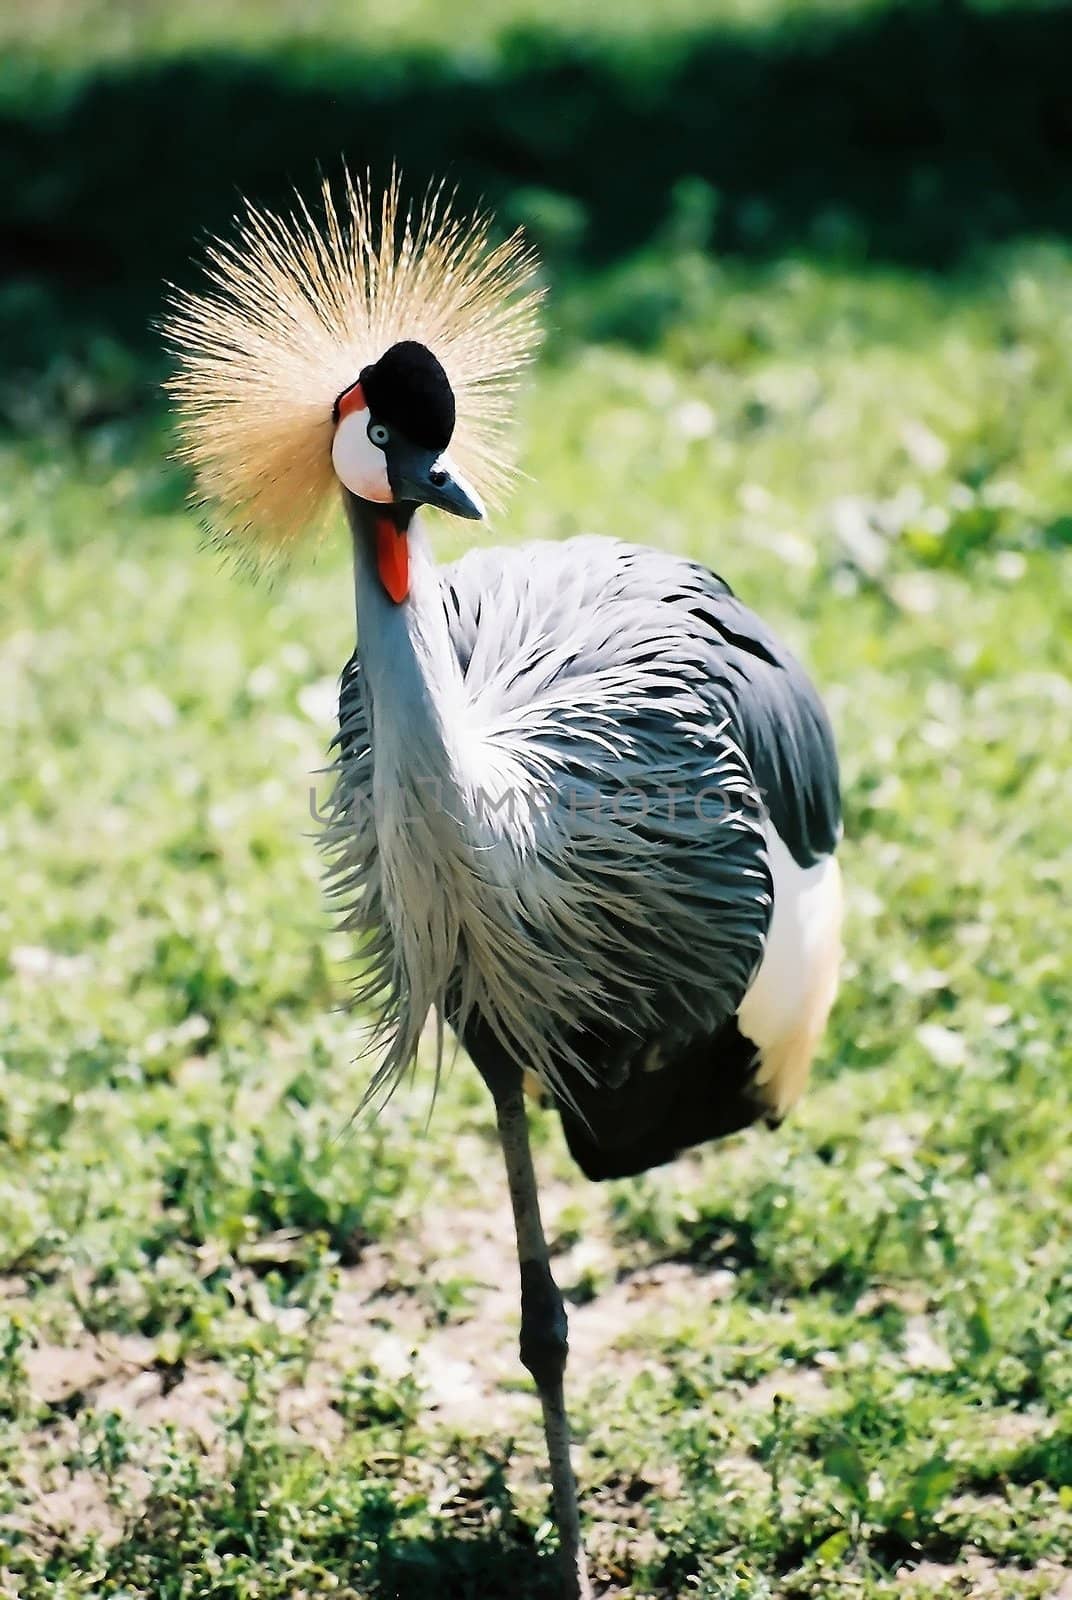 Grey Crowned Crane by d40xboy